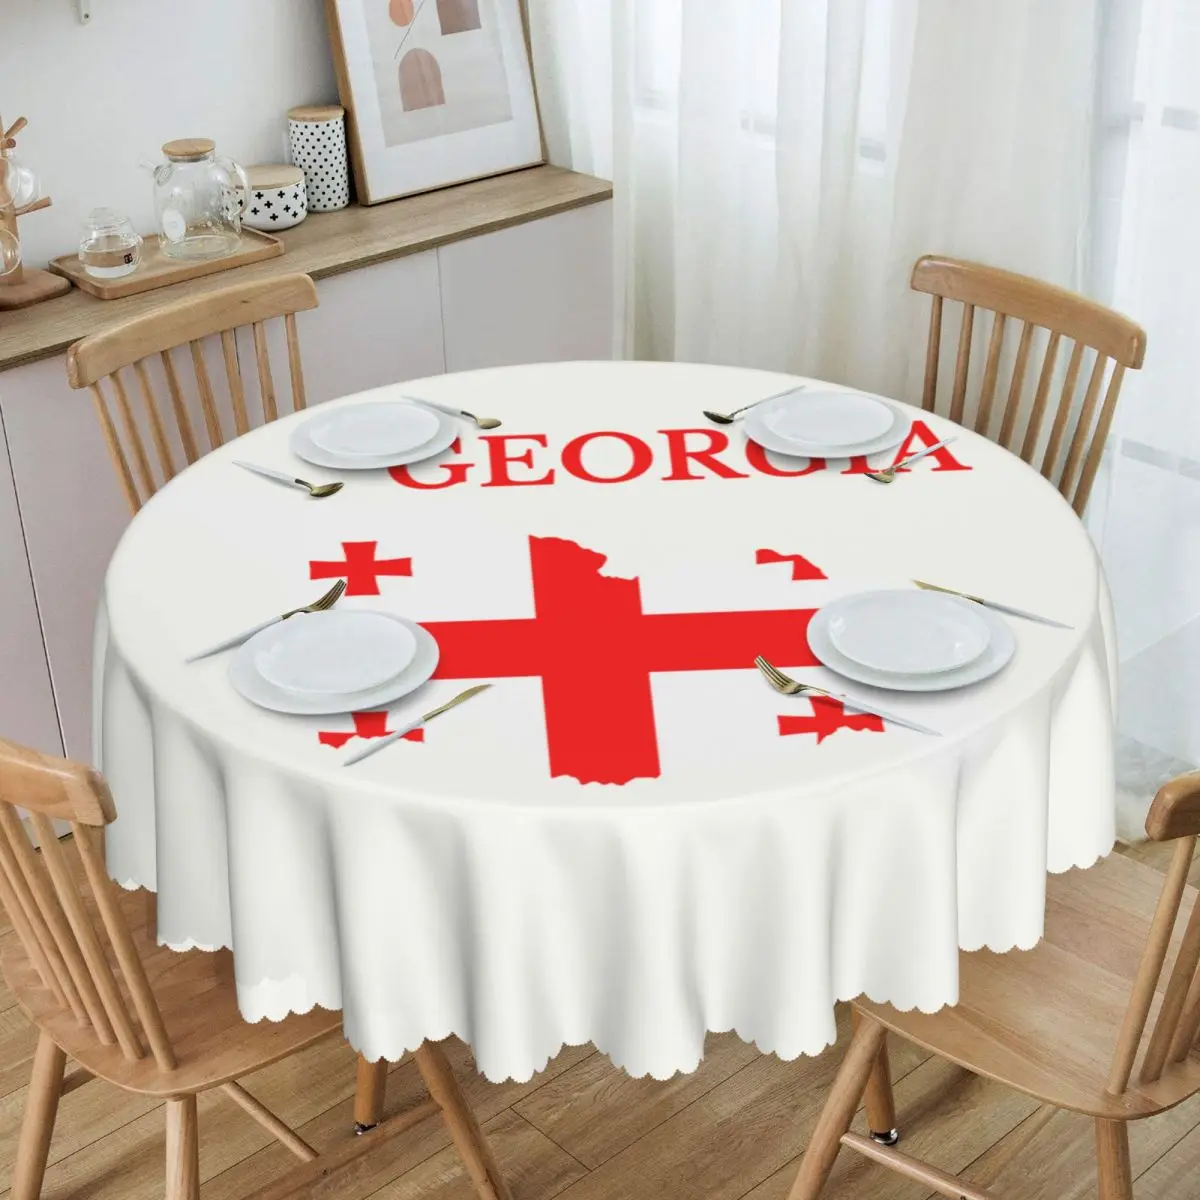 

Georgia Country Flag Map Tablecloth Round Oilproof Georgian Proud Patriotic Table Cover Cloth for Kitchen 60 inches